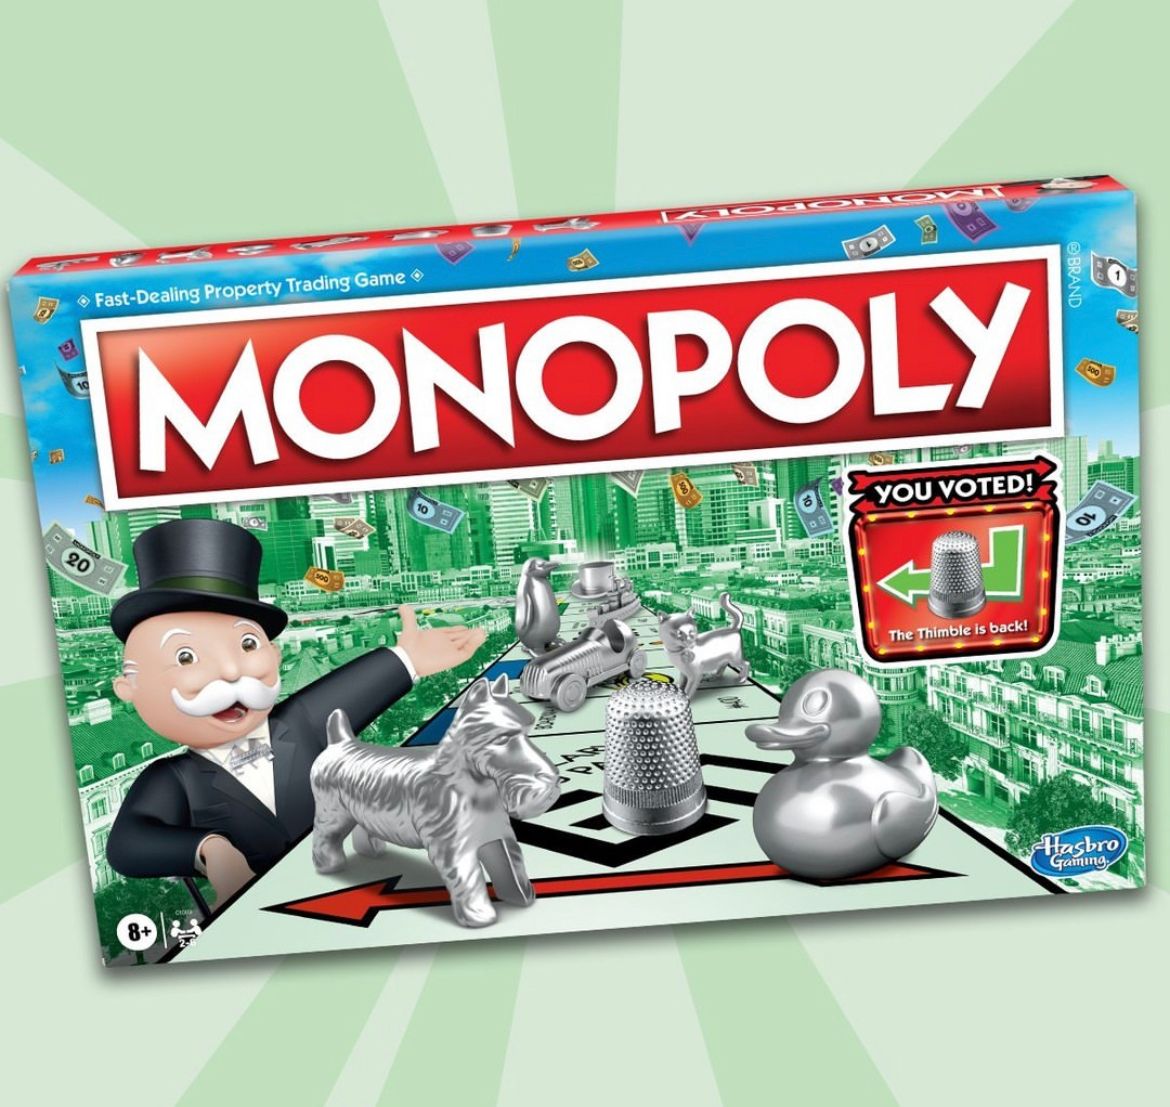 Ph. Credits @monopolygameofficial Instagram Official Page